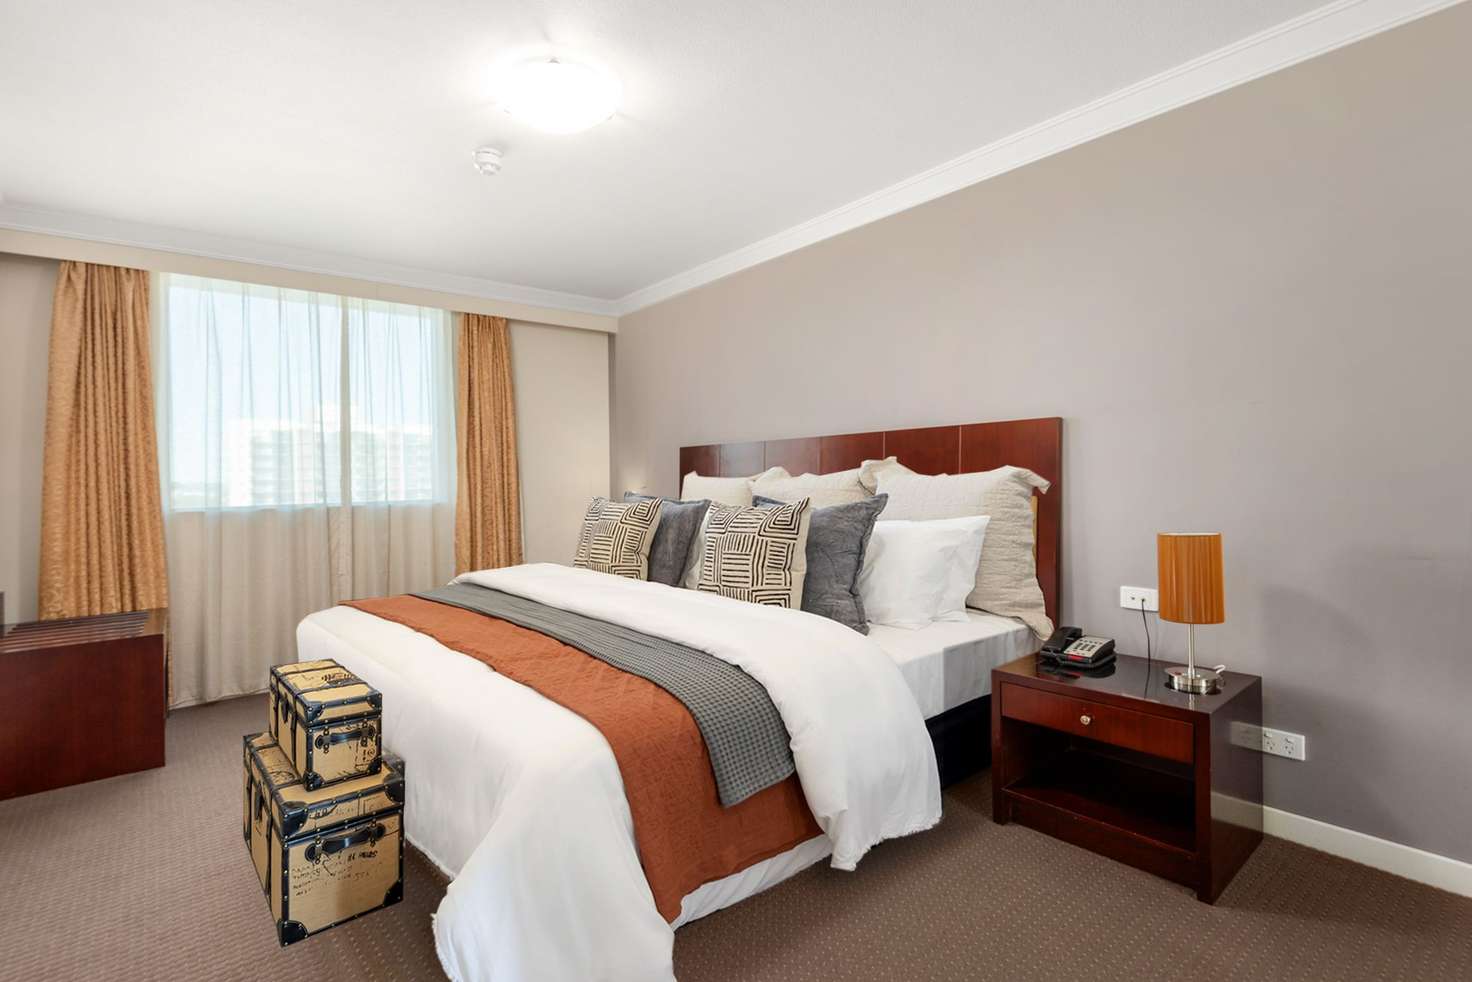 Main view of Homely apartment listing, 509/14-16 Carol Avenue, Springwood QLD 4127